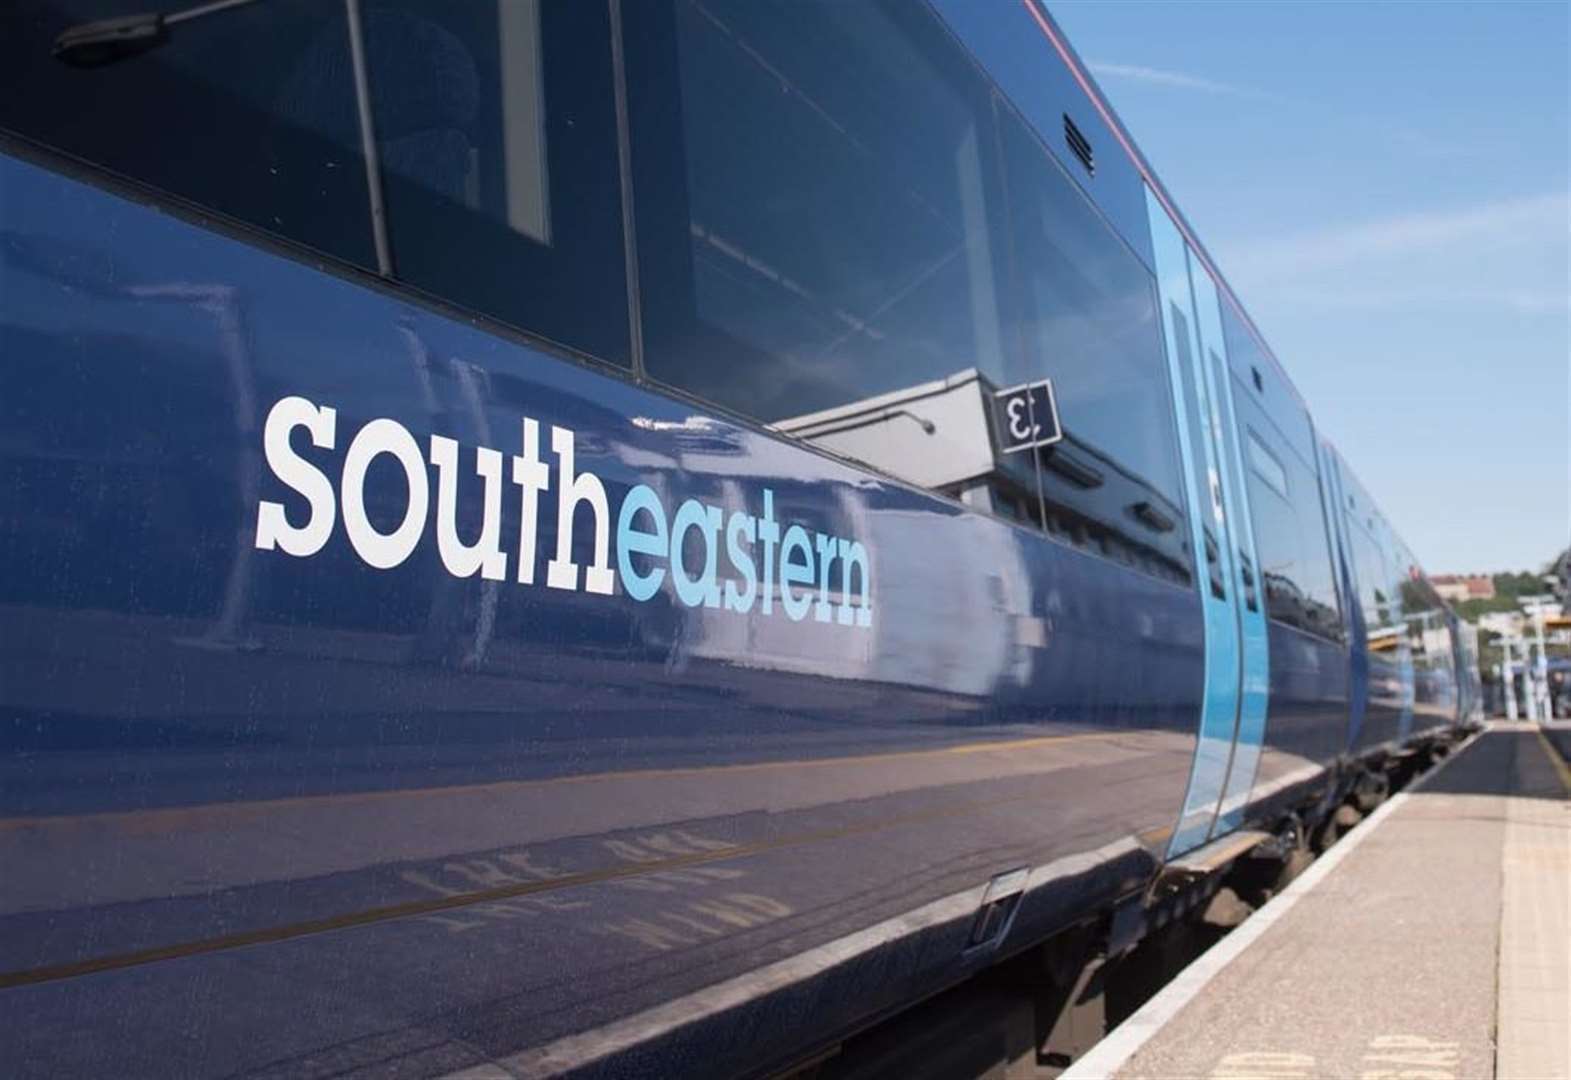 Services have been disrupted after a person was hit by a train. Stock image